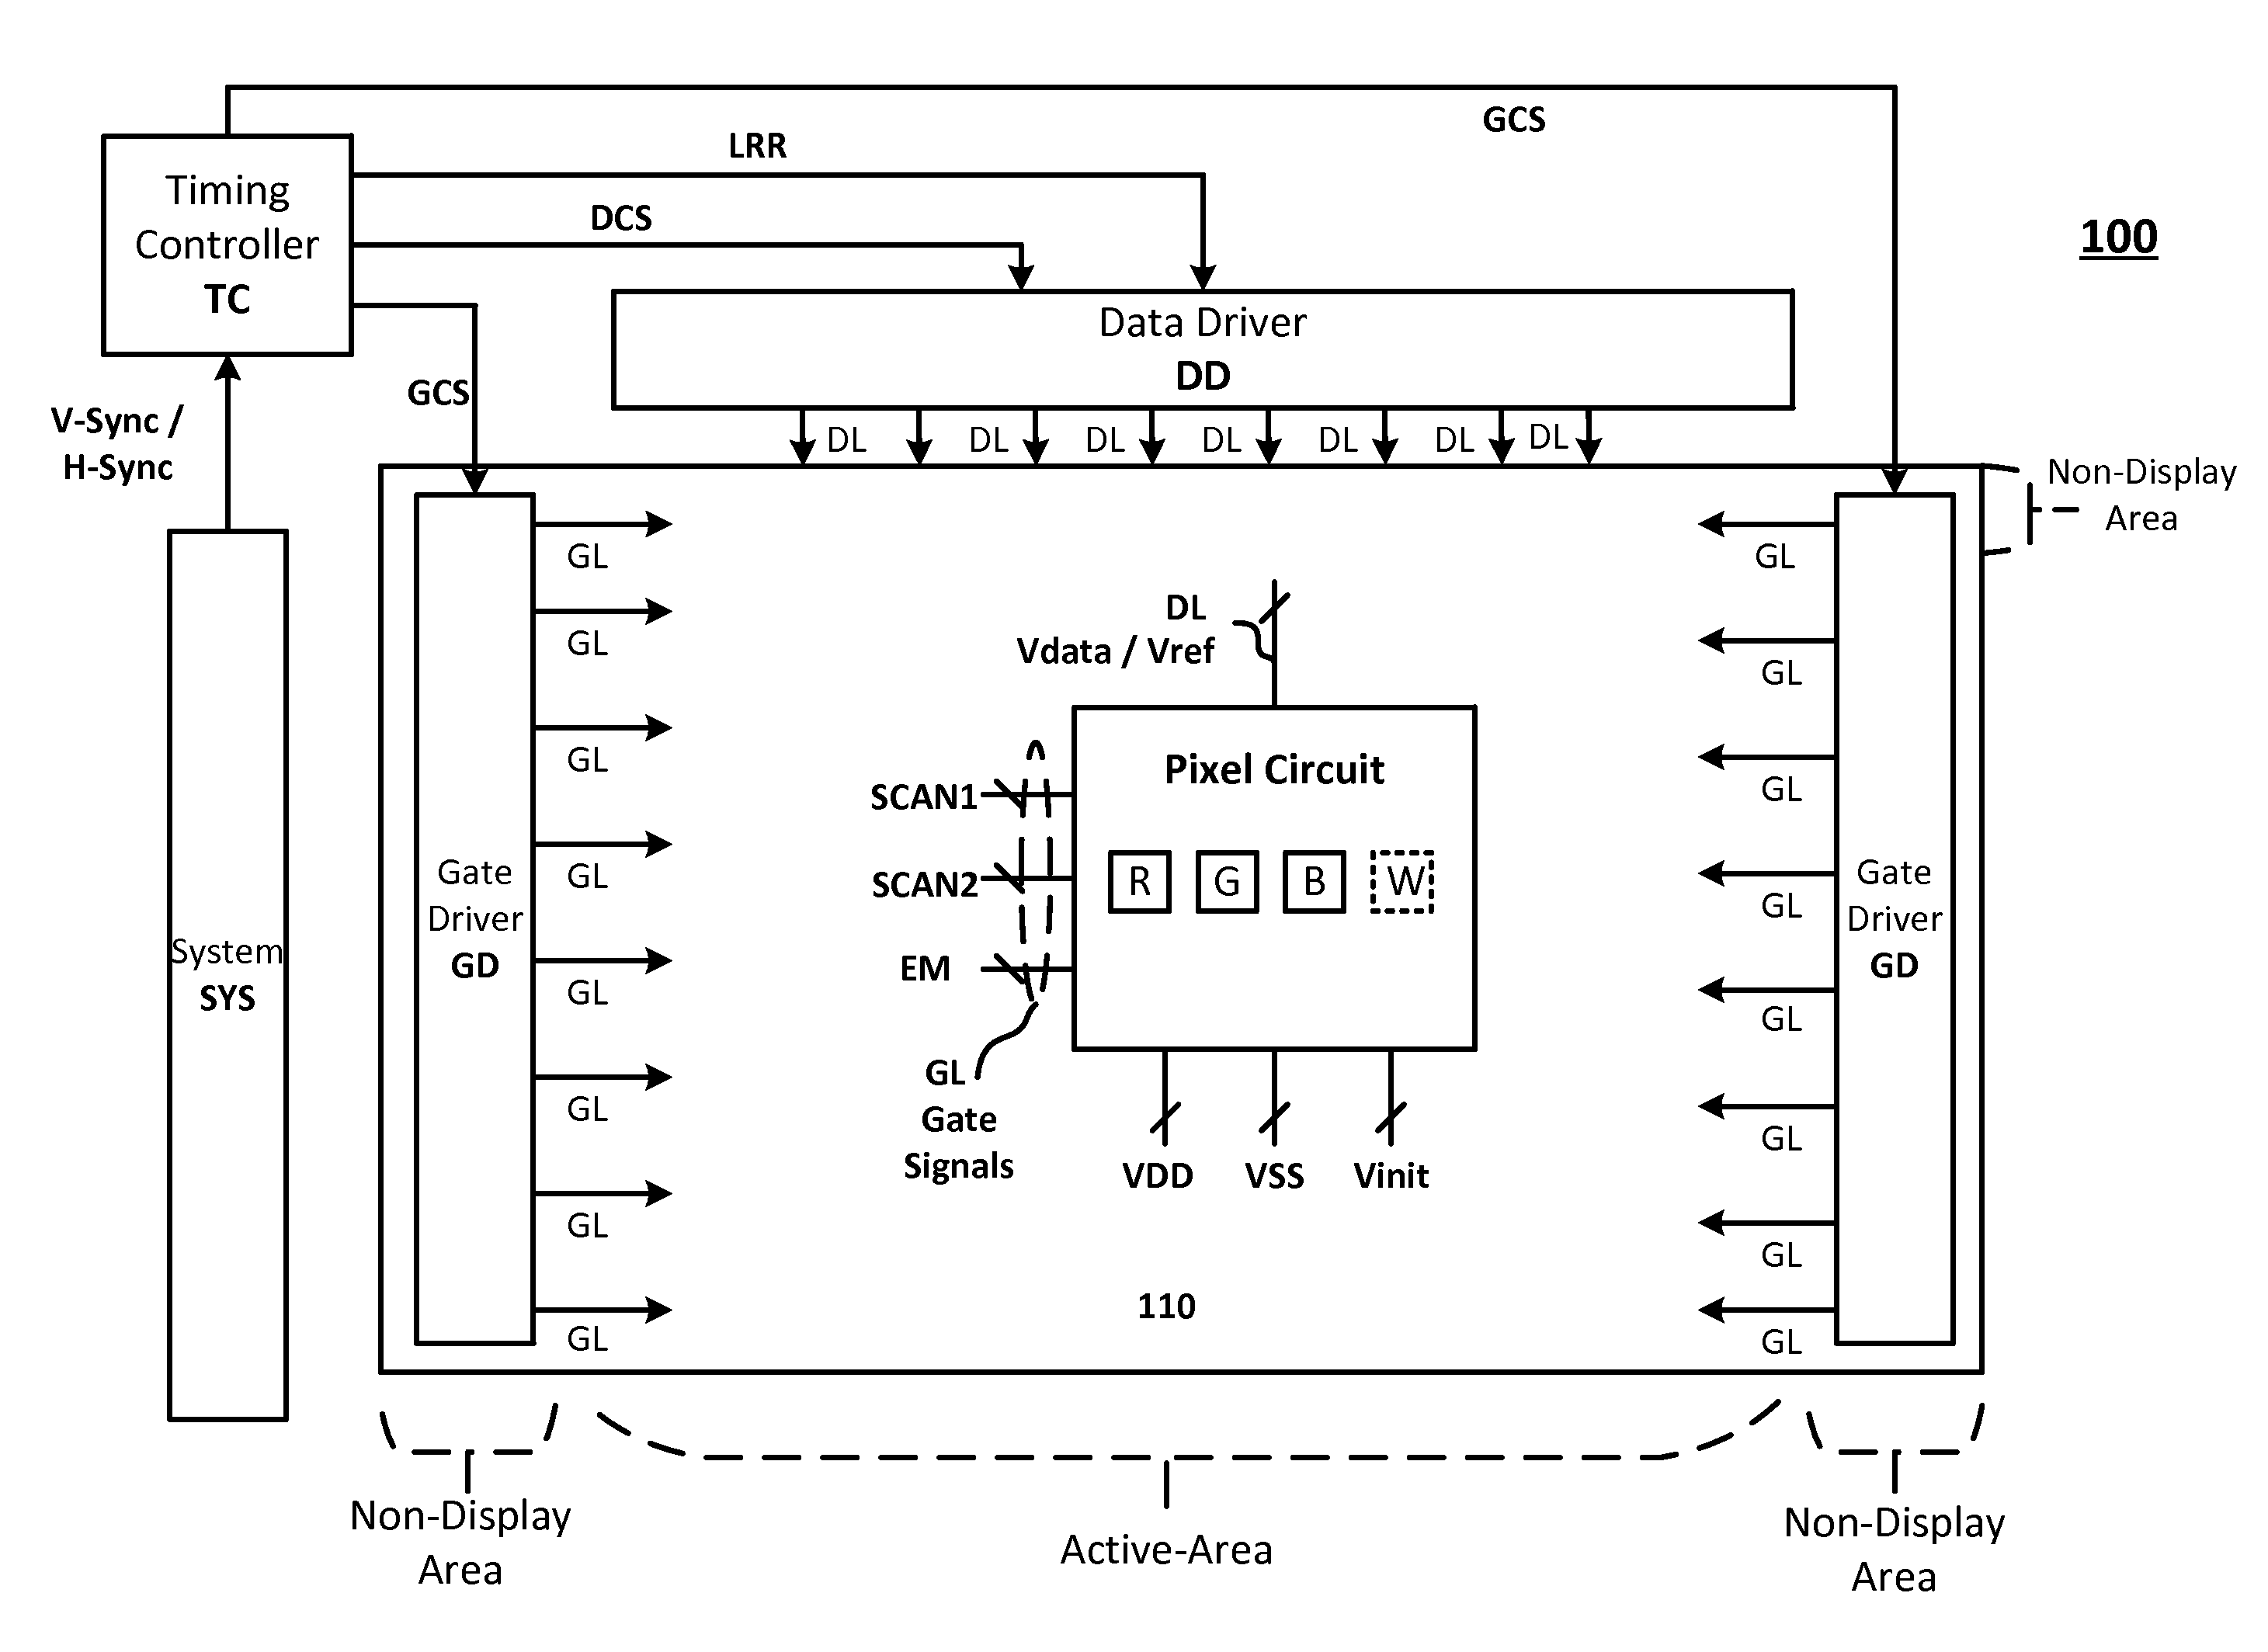 Display Having Selective Portions Driven with Adjustable Refresh Rate and Method of Driving the Same